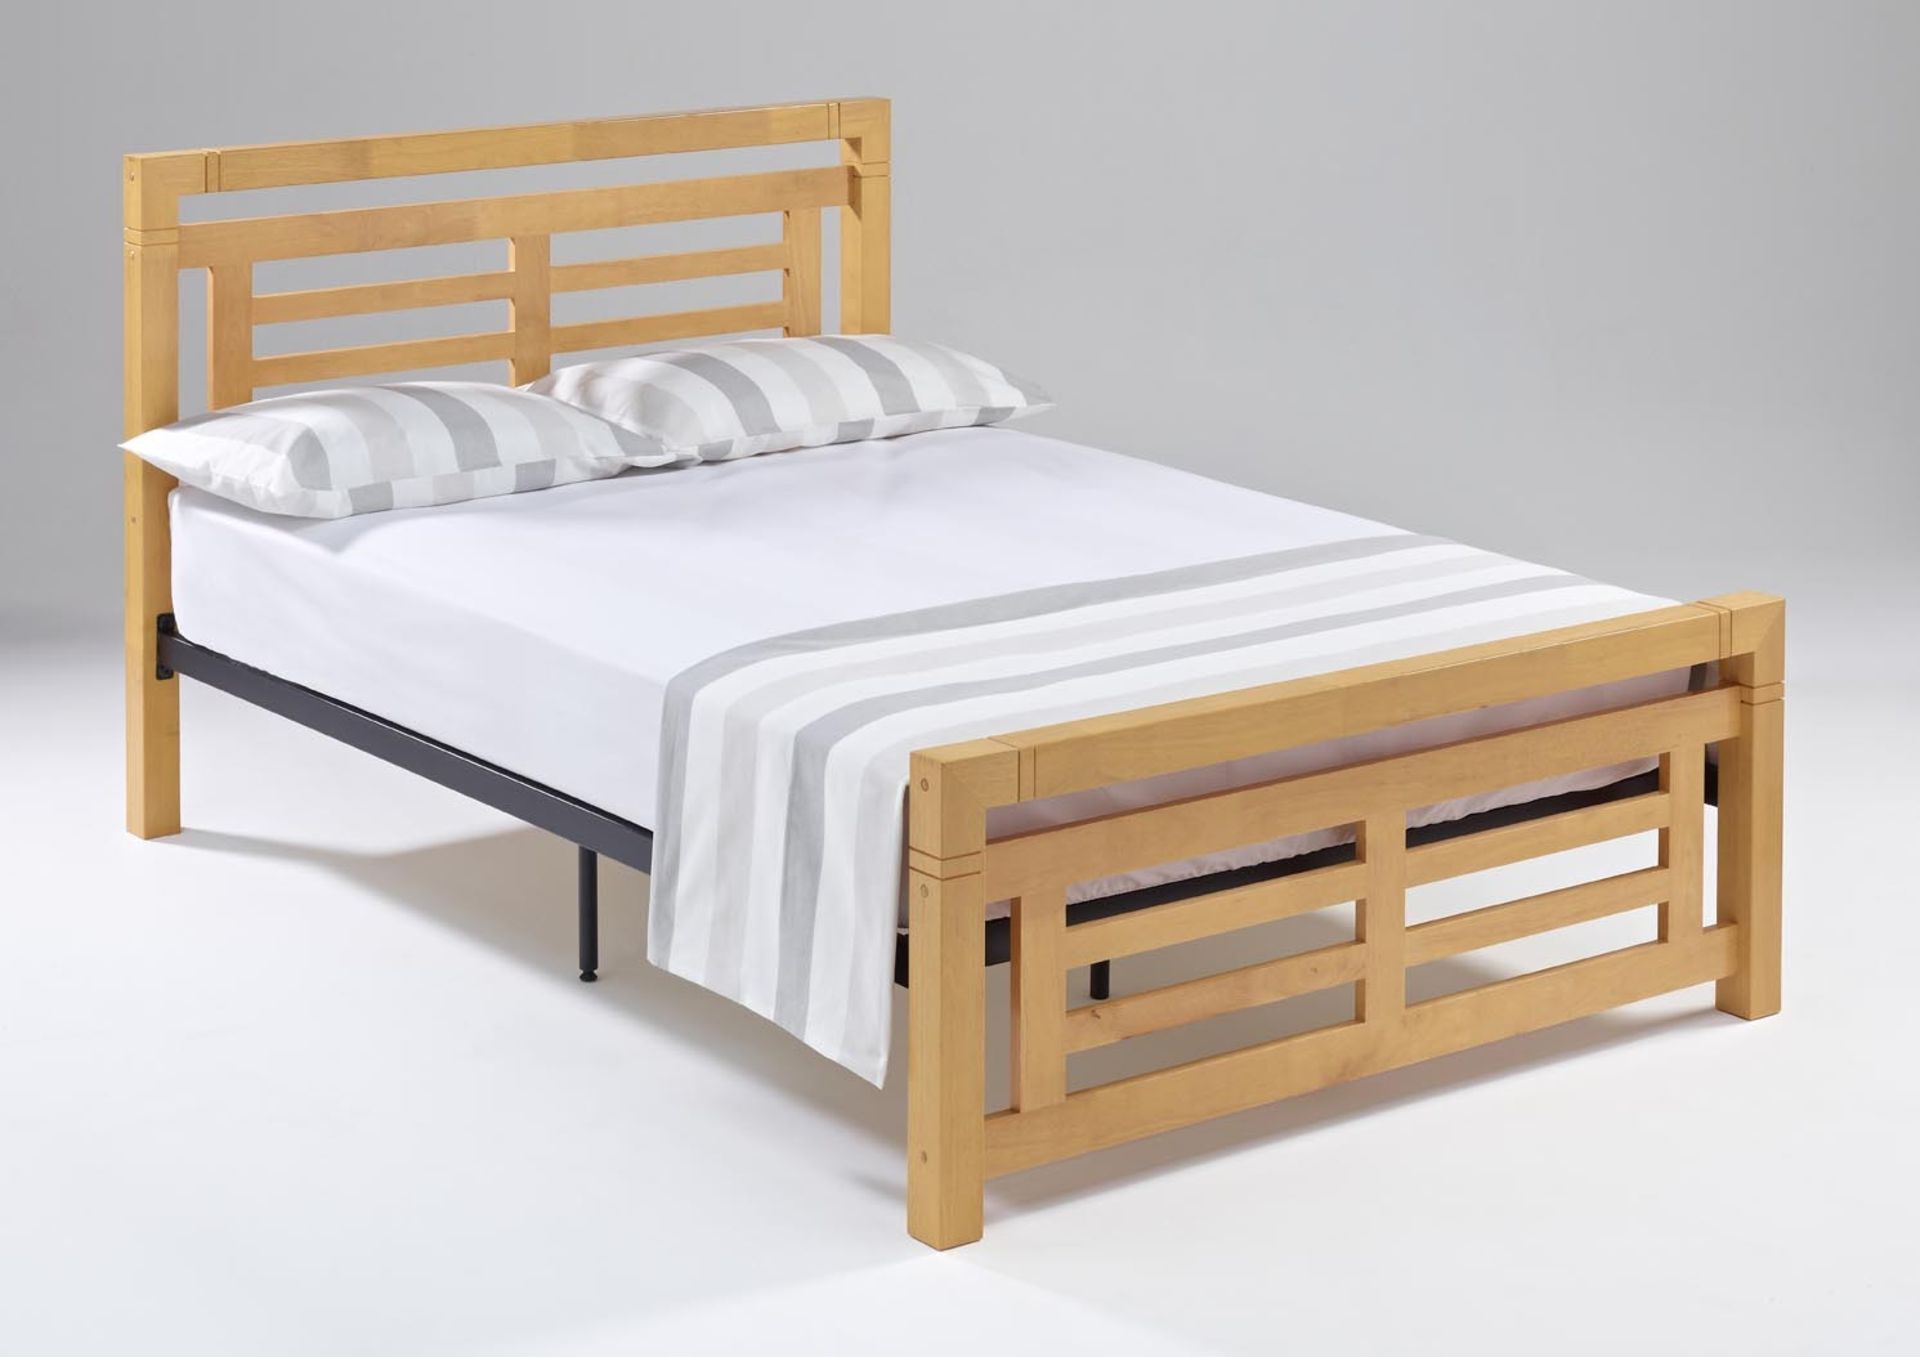 Brand New and Boxed Kingsize Colorado Bed (Beech)